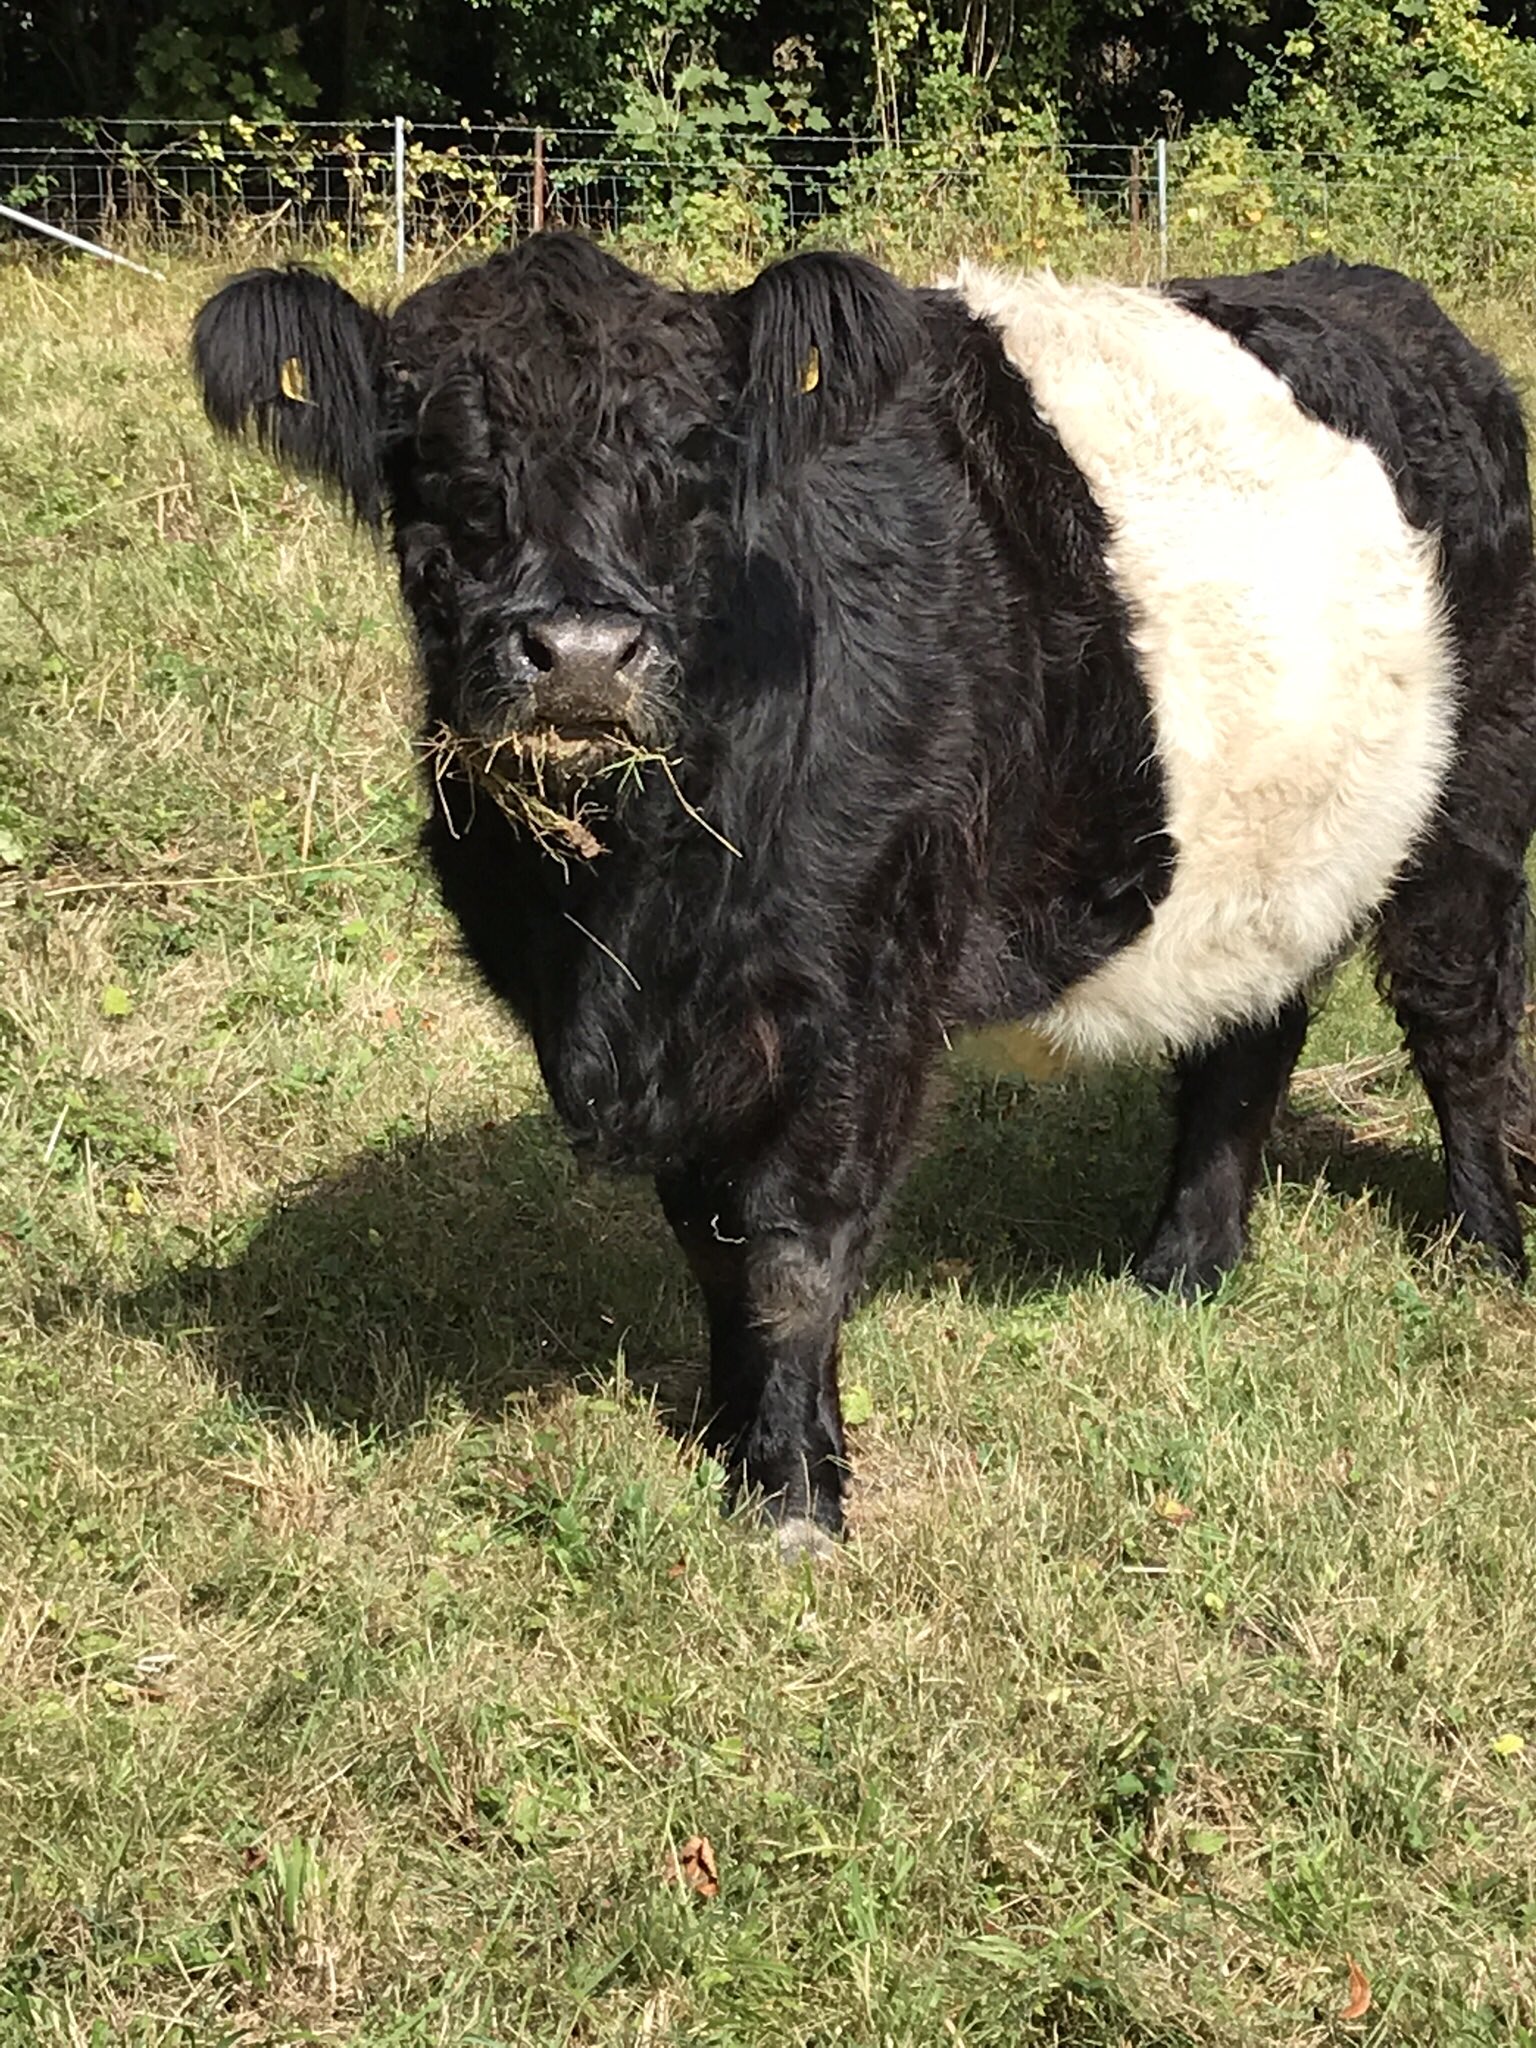 Belted Galloway cow at Manor Farm near Dorking, Surrey